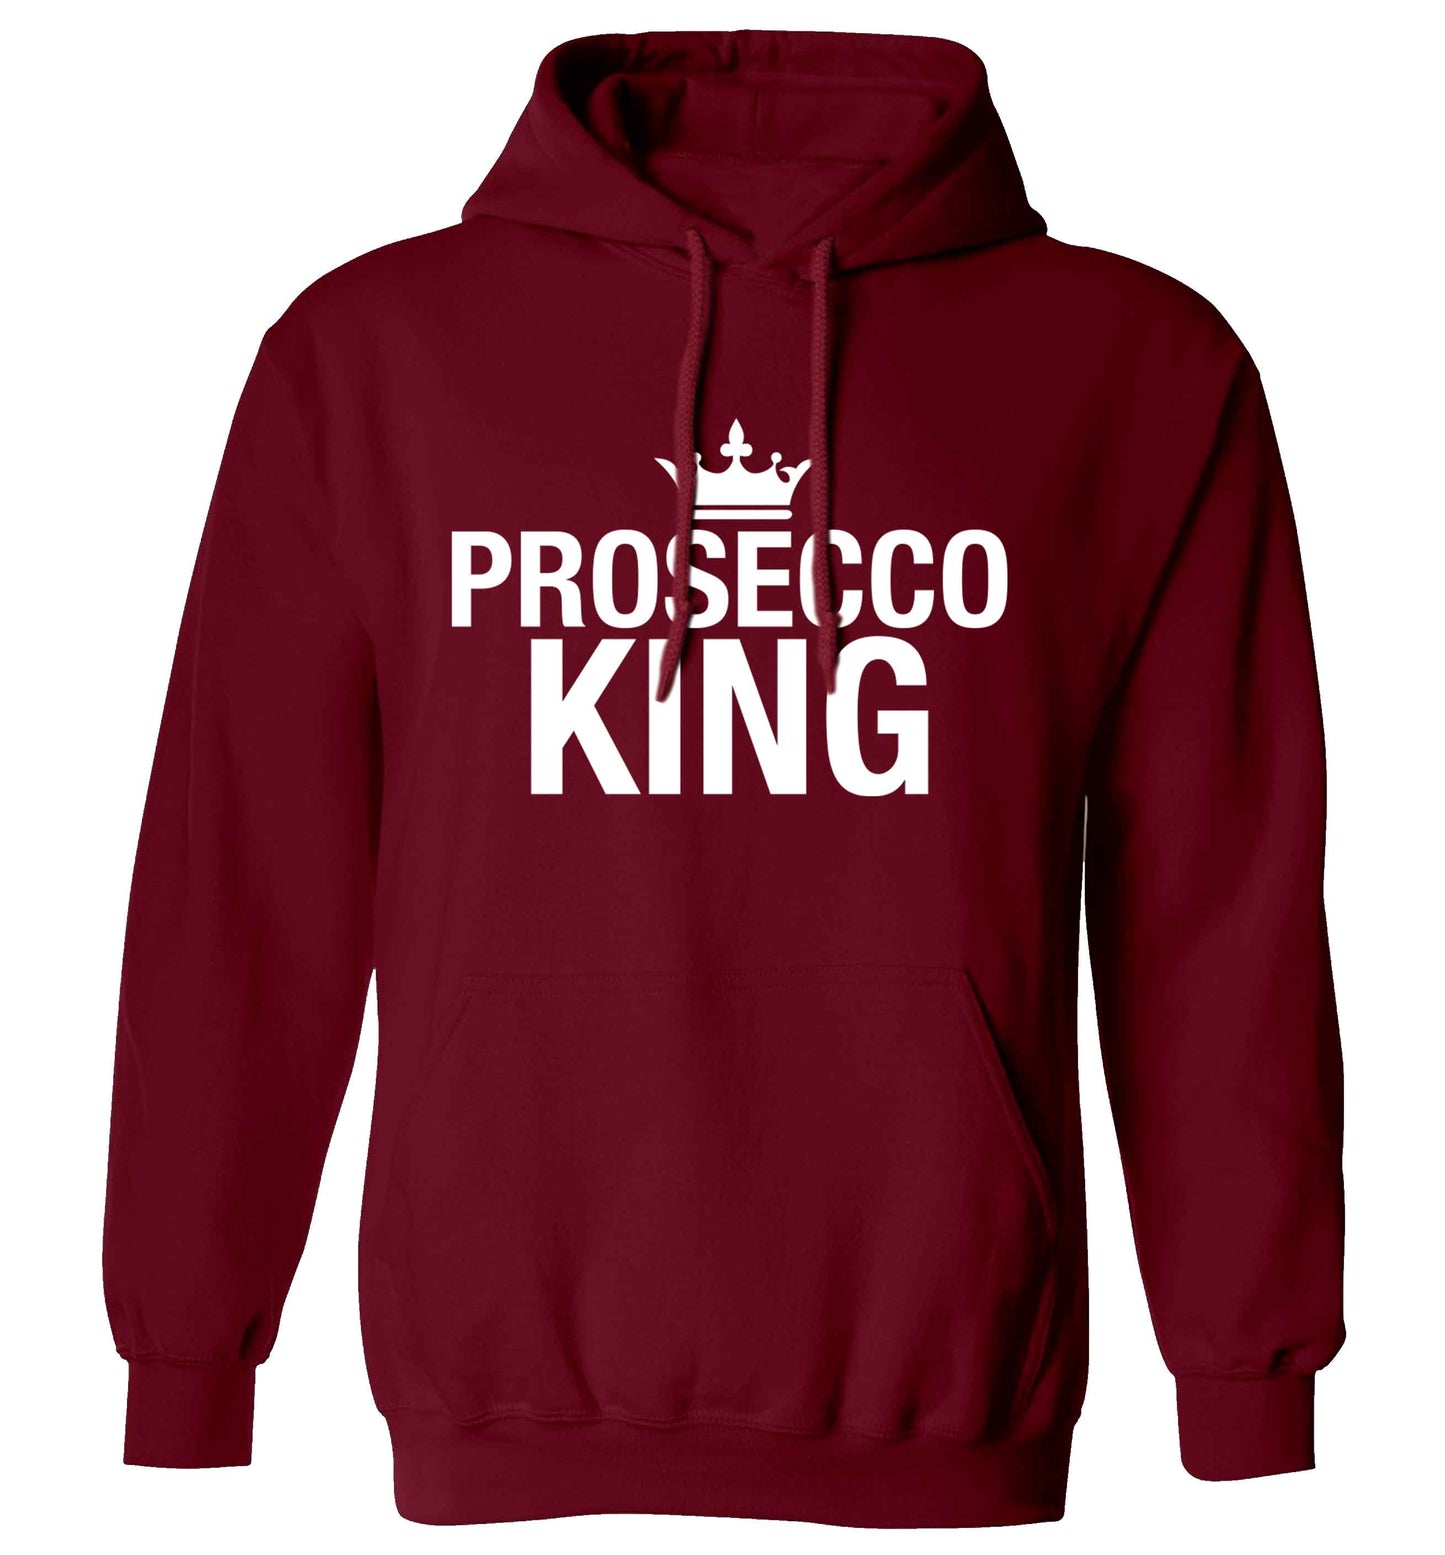 Prosecco king adults unisex maroon hoodie 2XL